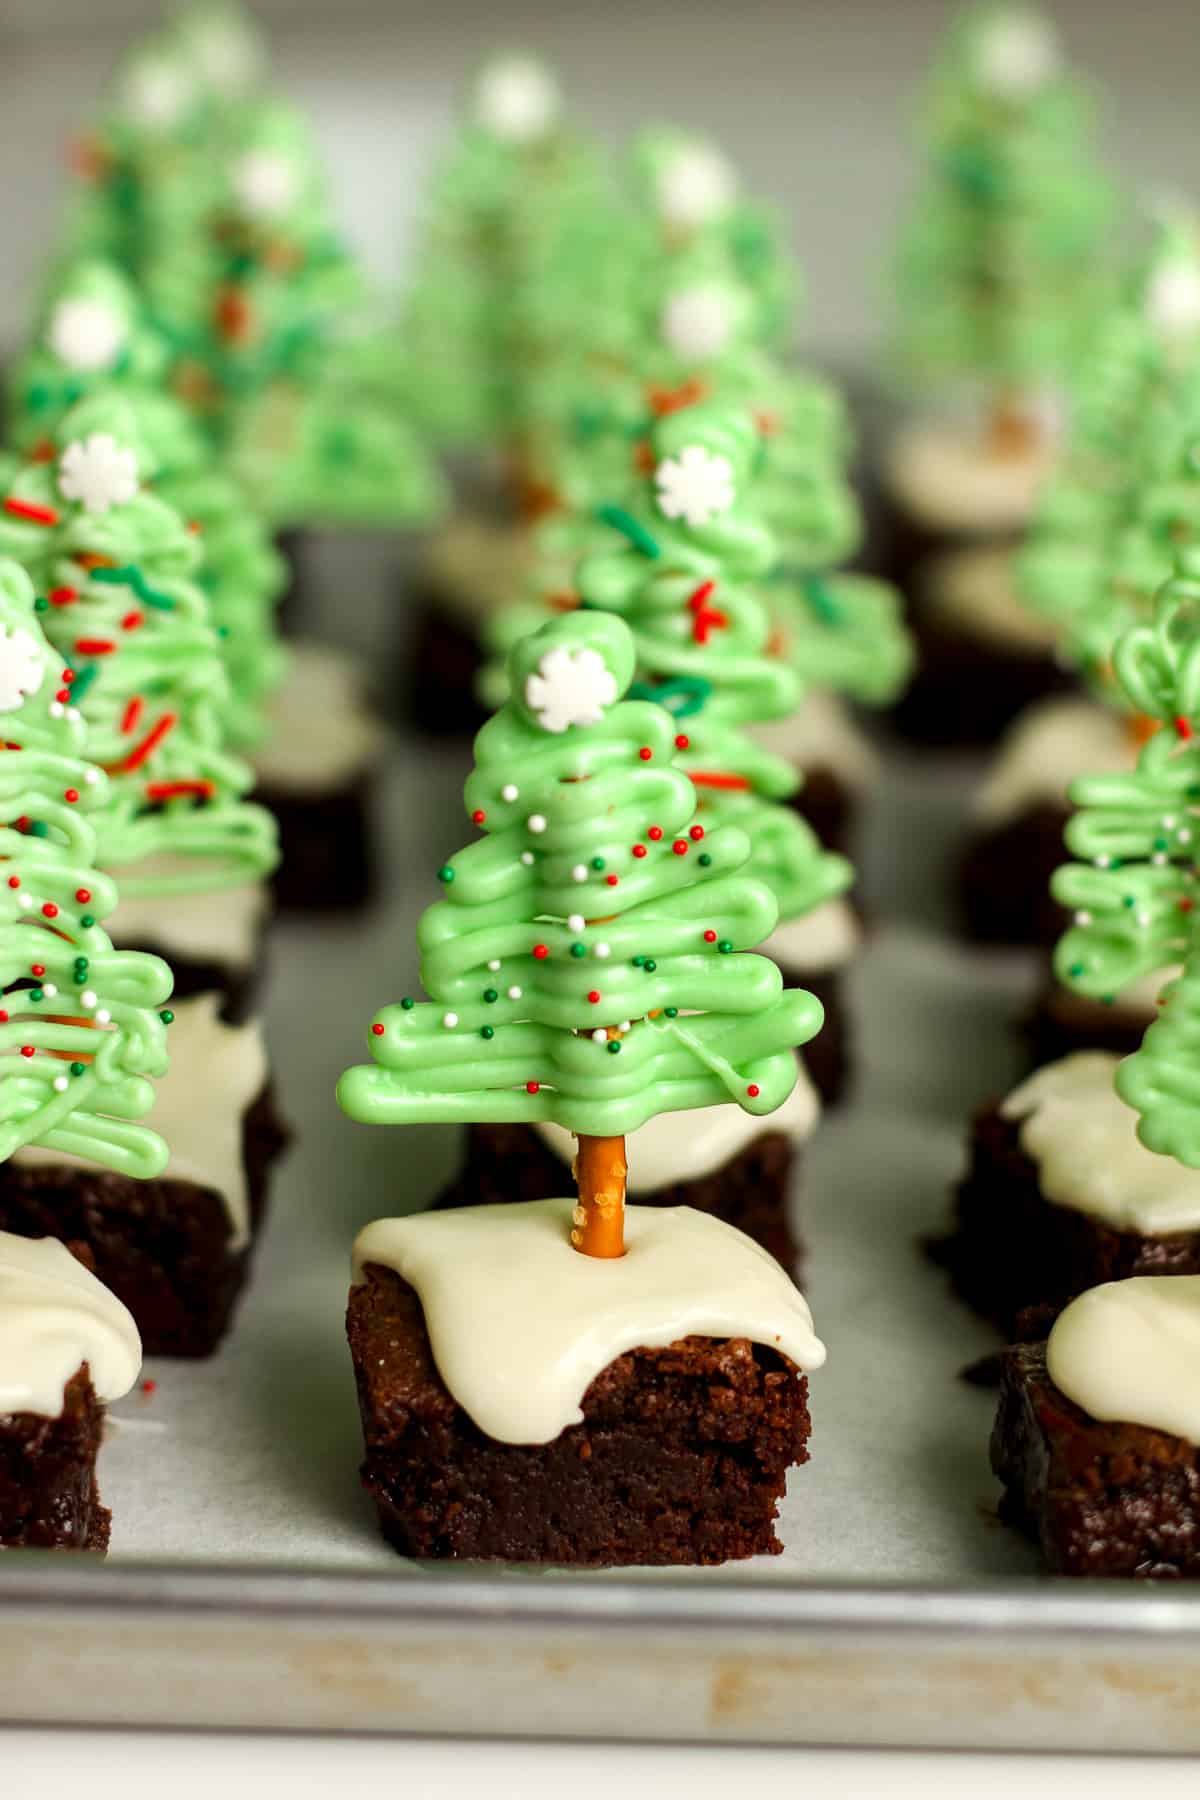 The Christmas trees on brownies on a baking sheet.